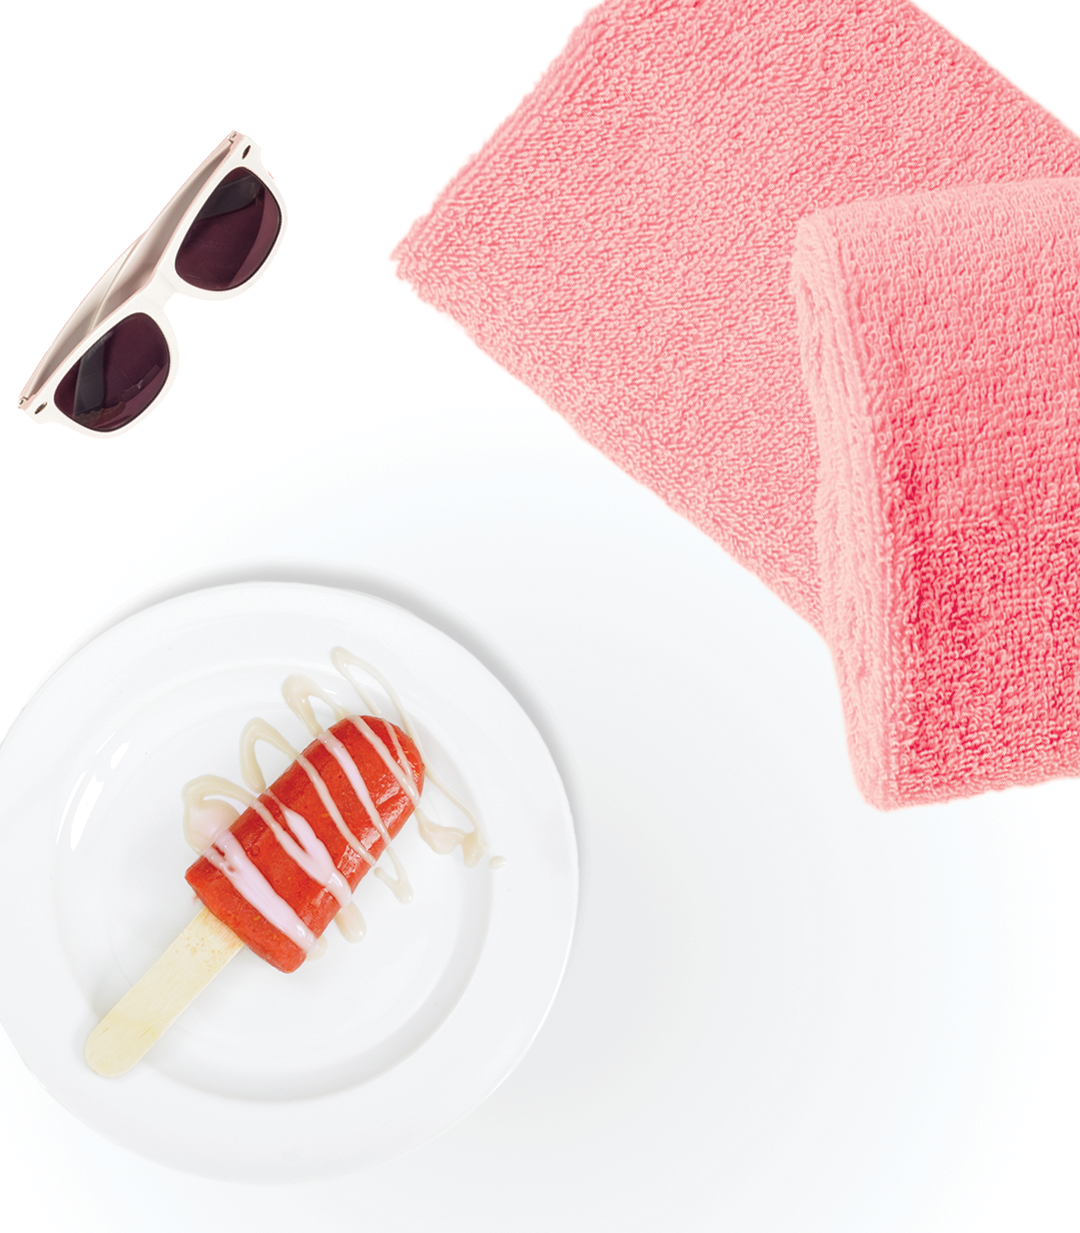 A raspberry lemonade popsicle on a plate. A pair of sunglasses and pink beach towel sit next to the plate.